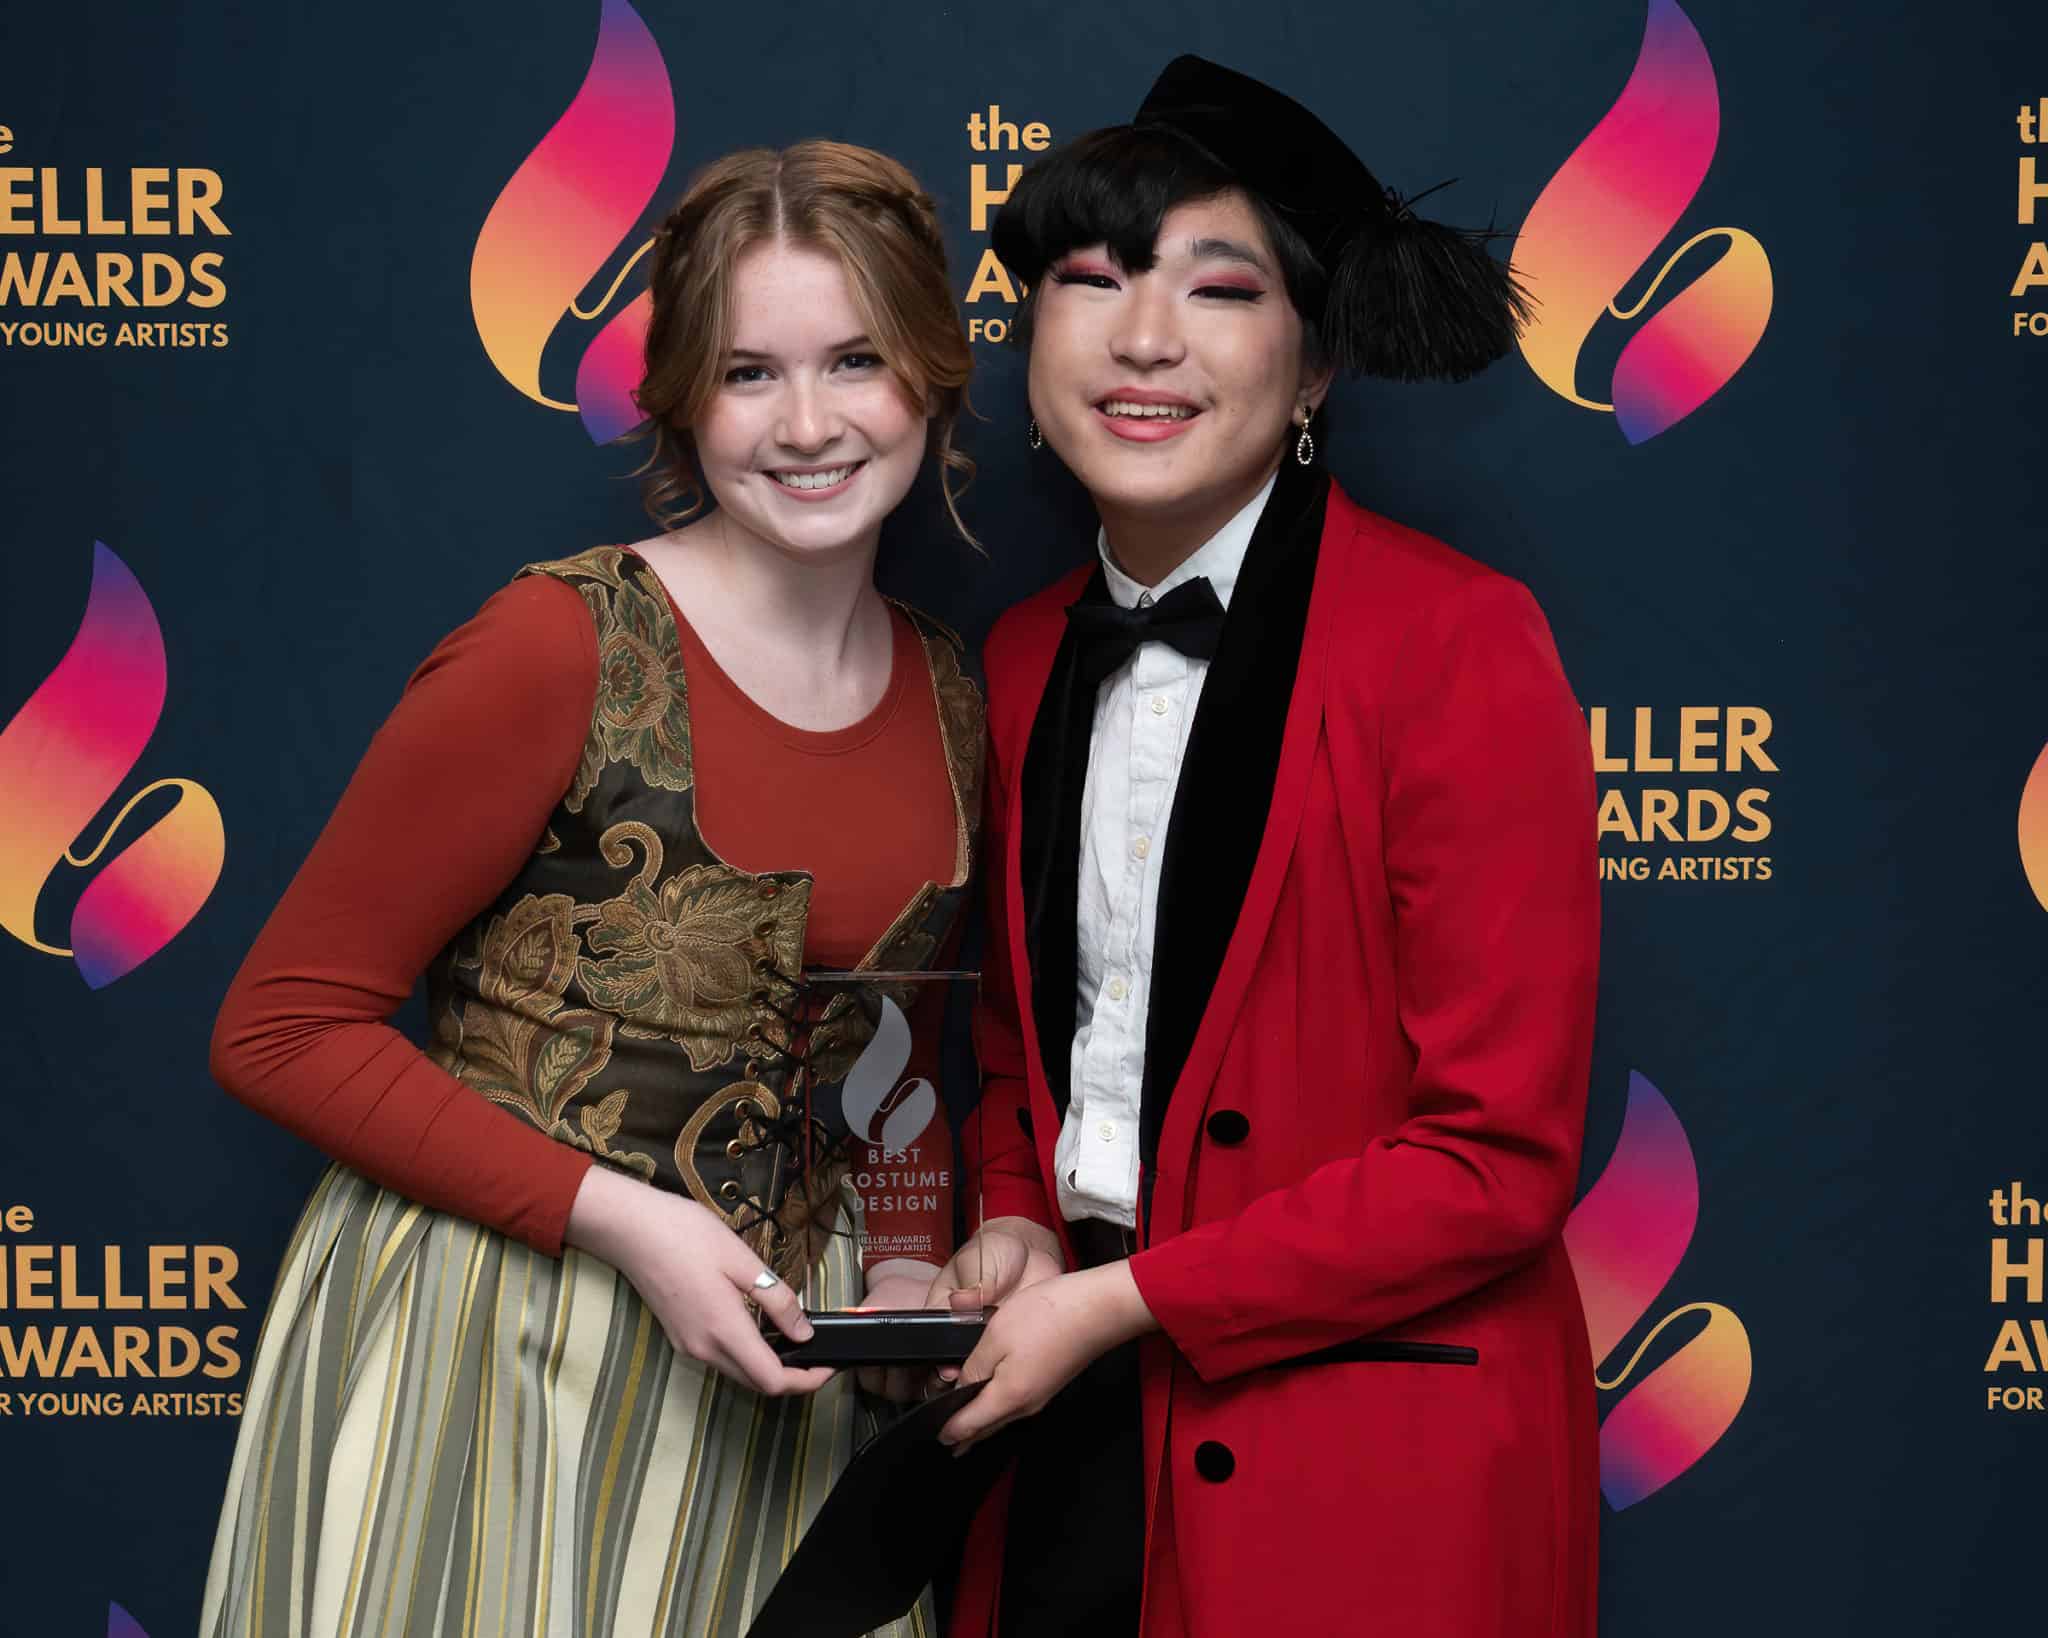 The Results are In! Here are the 2022 Heller Awards for Young Artists